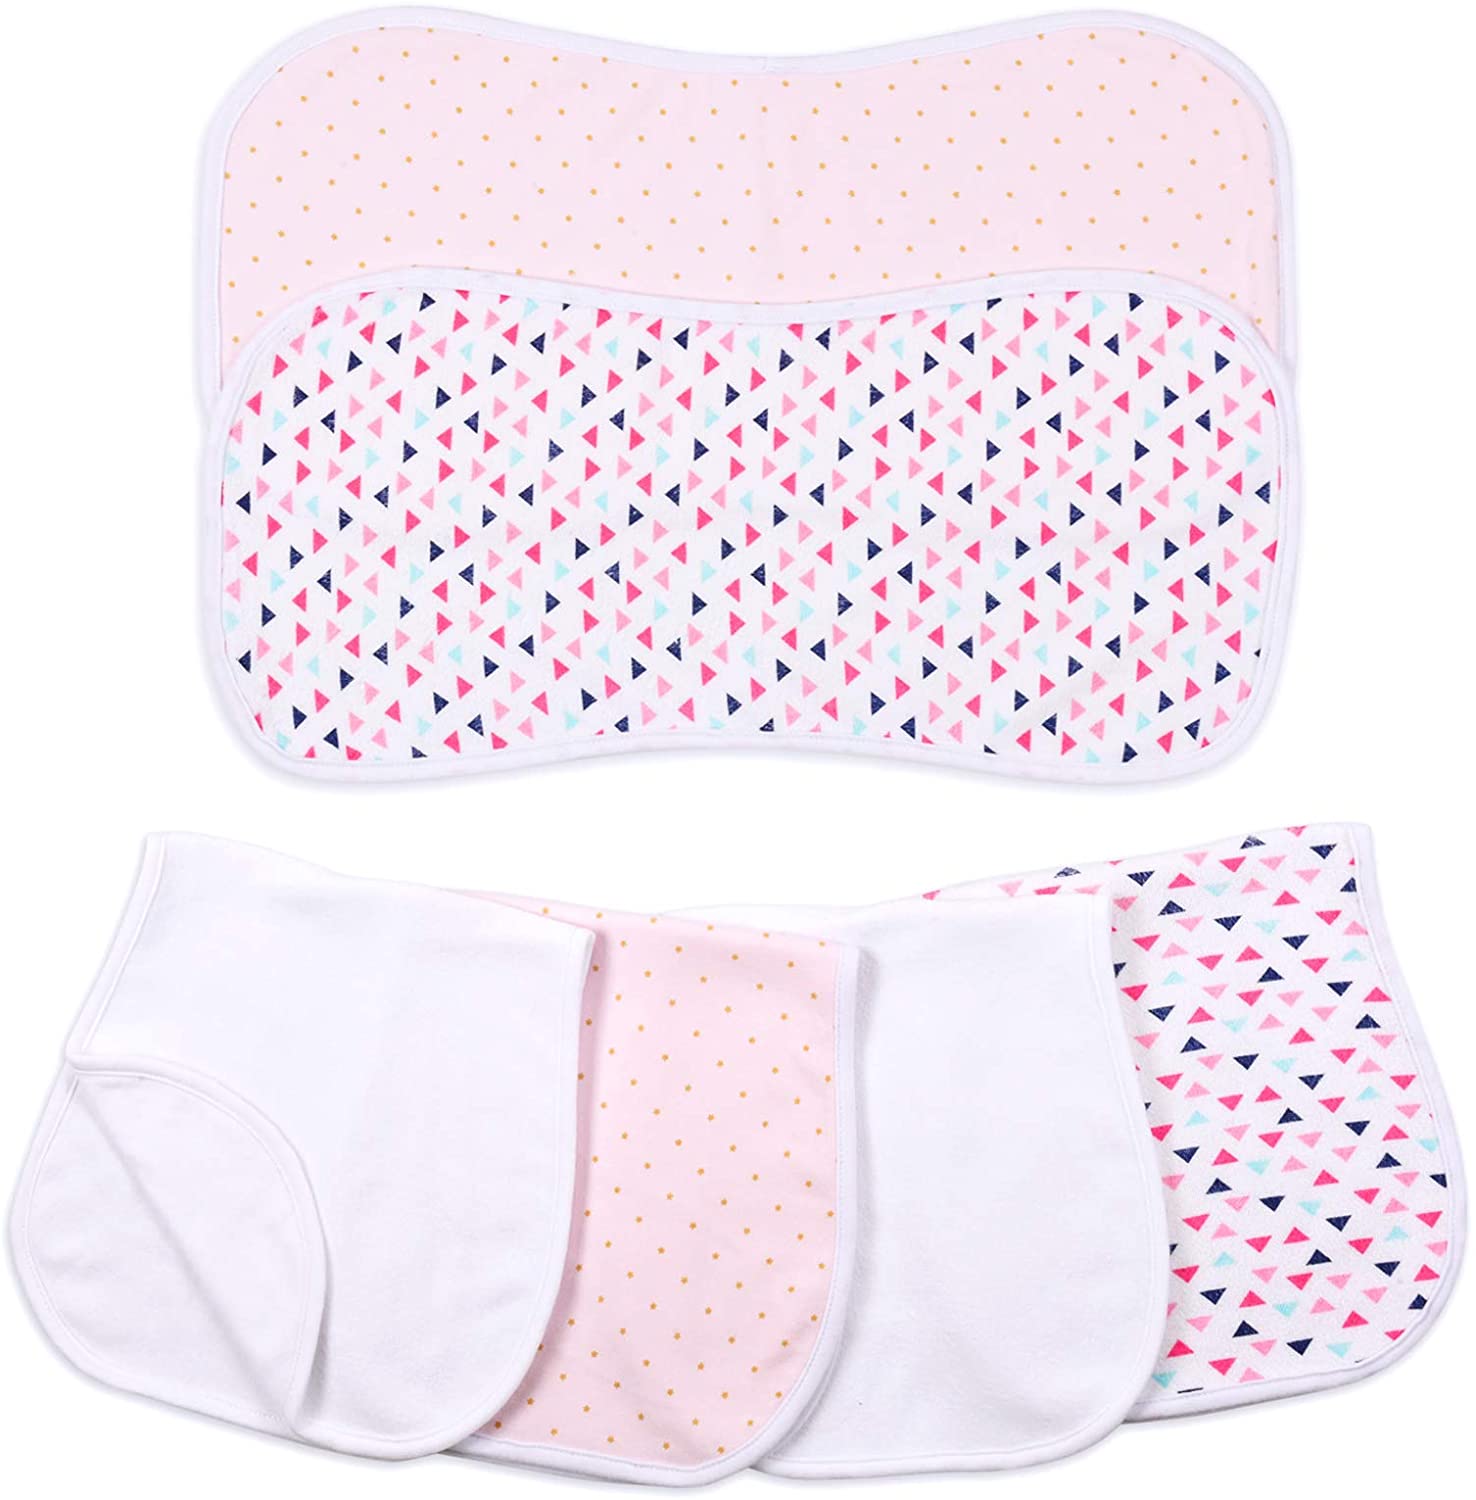 Tips for Choosing the Right Baby Burp Cloths